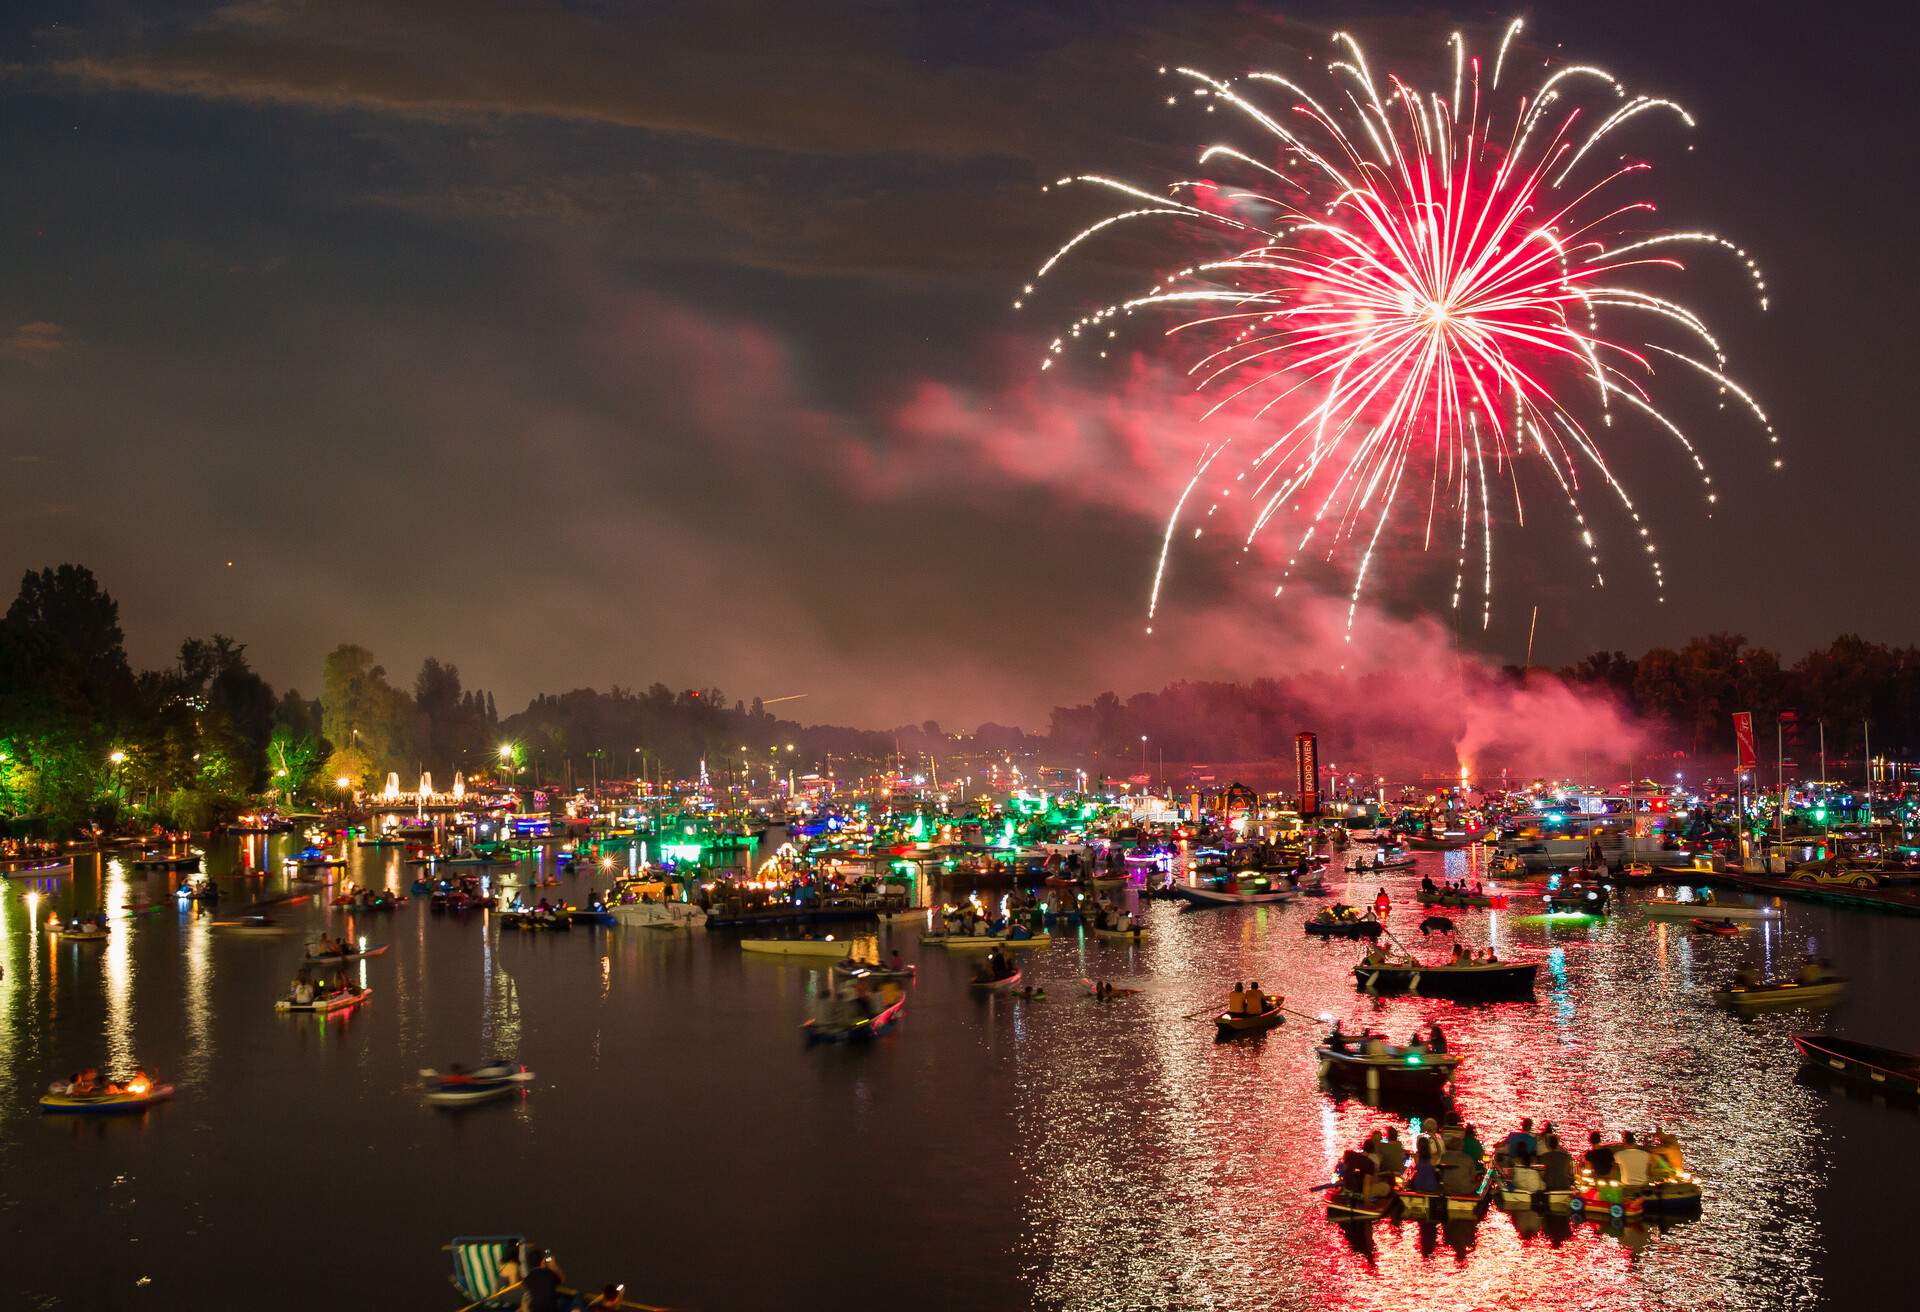 A river crowded with people riding on boats at night, with fireworks lighting up the dark sky.